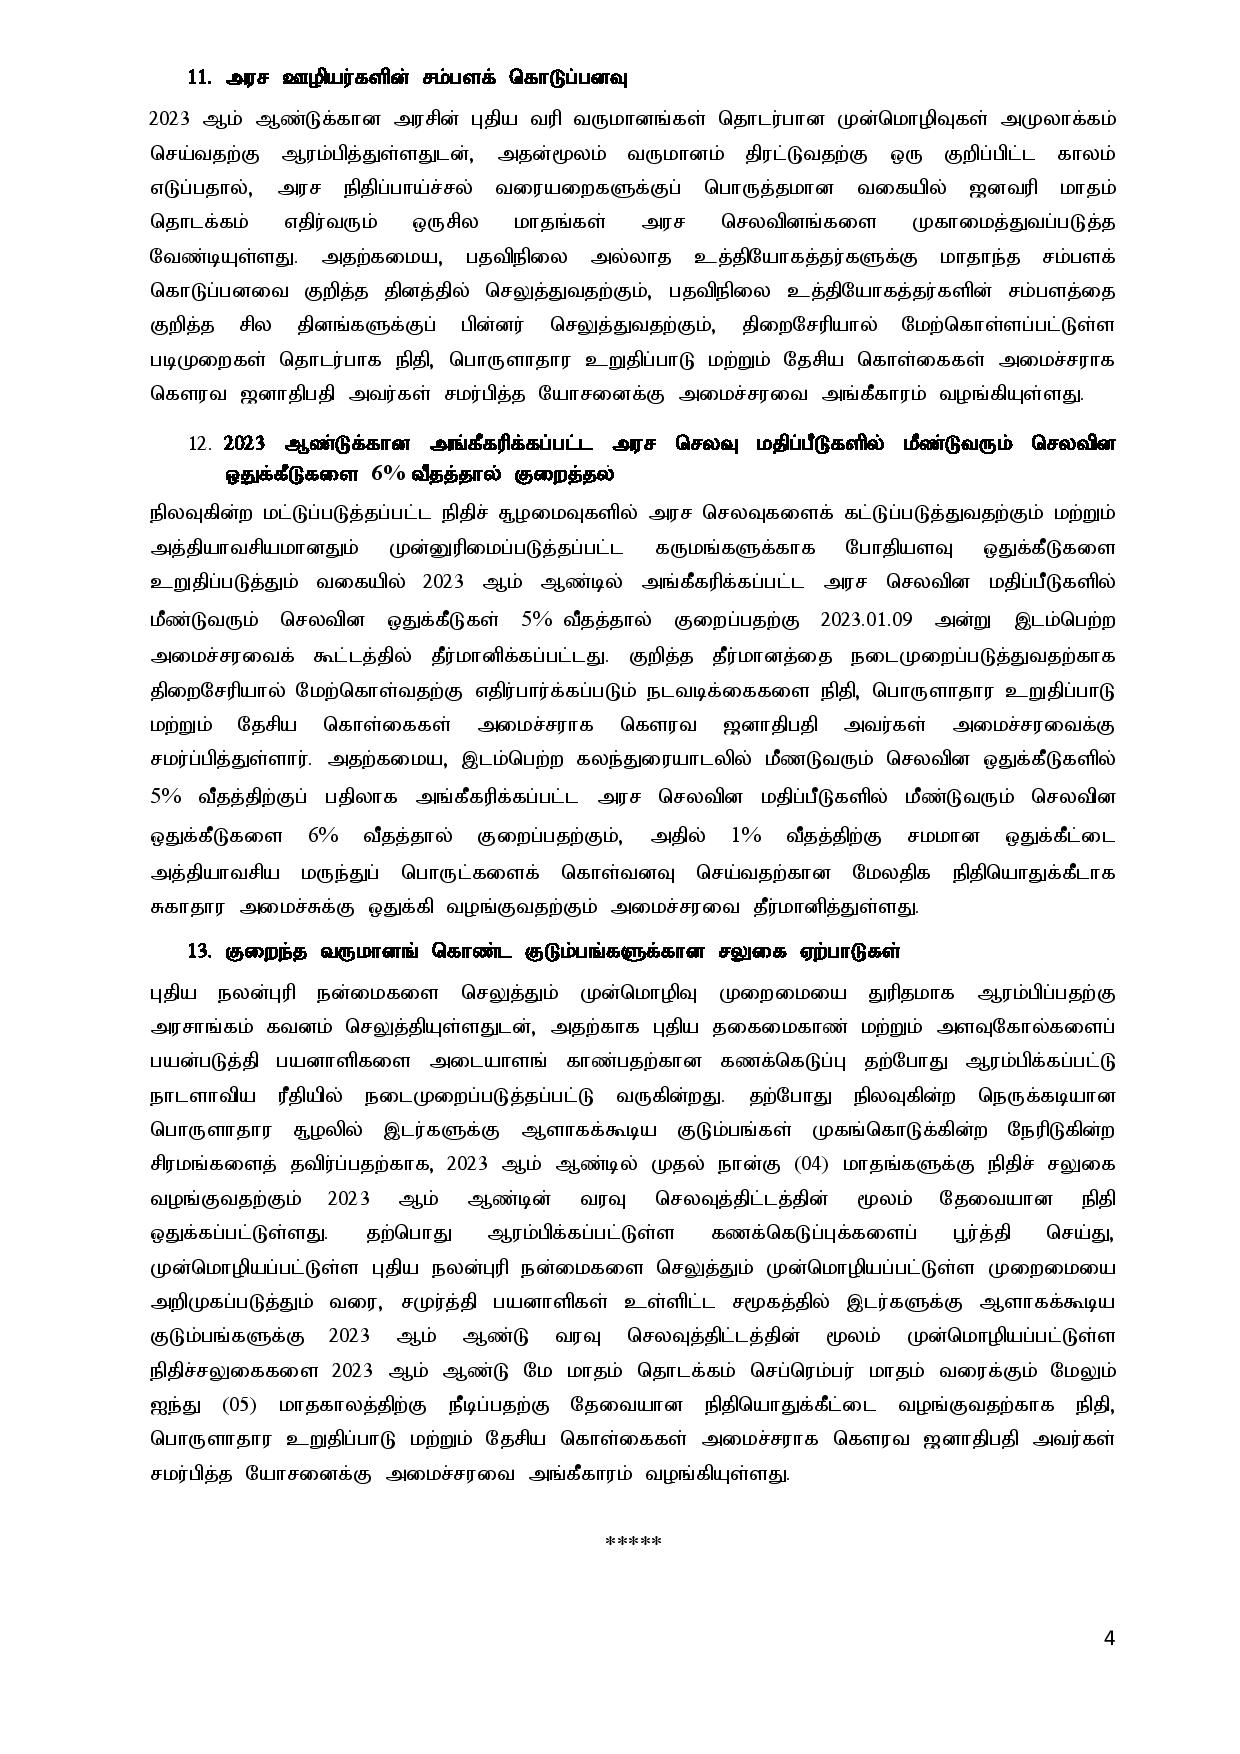 Cabinet Decisions on 16.01.2023 Tamil 1 page 004